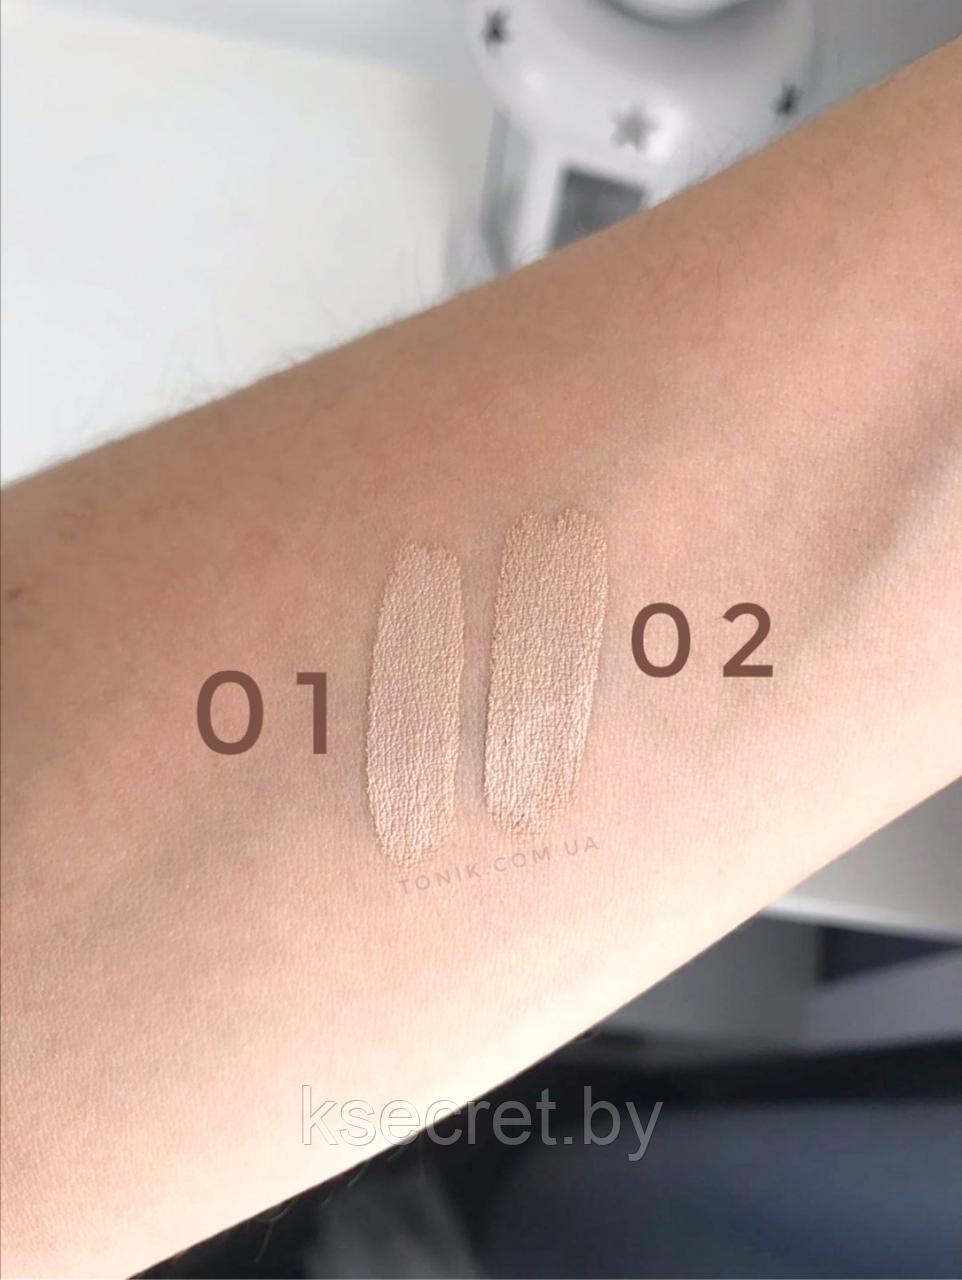 Enough Collagen Whitening Cover Tip Concealer 3in1 #02 Clear Beige Осветляющий коллагеновый консилер 5гр - фото 3 - id-p152528982